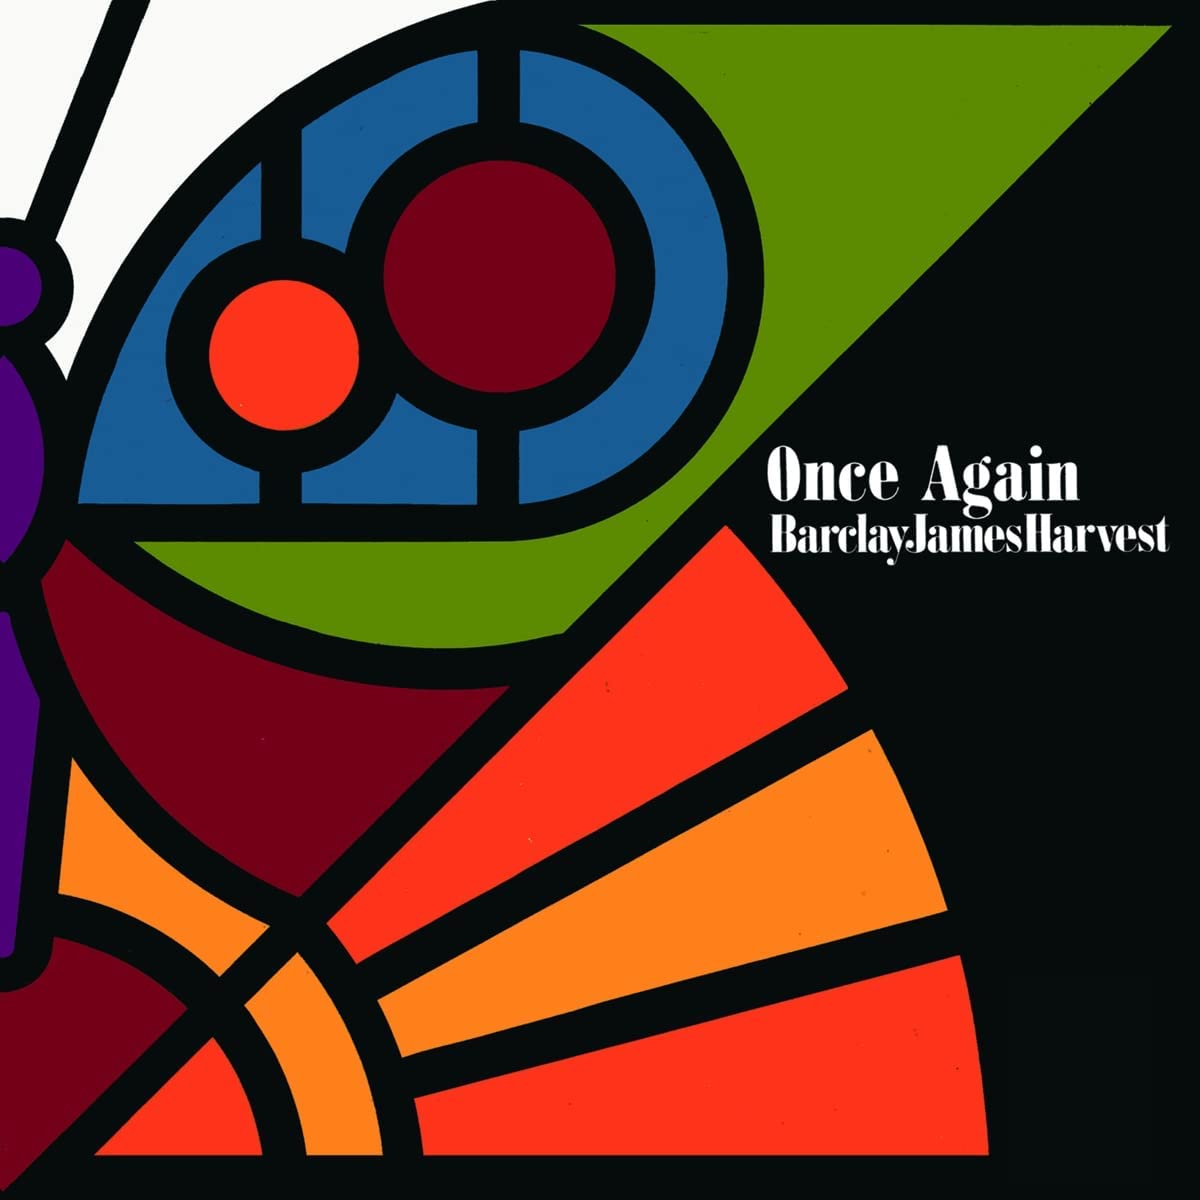 BARCLAY JAMES HARVEST - Once Again - Deluxe edition